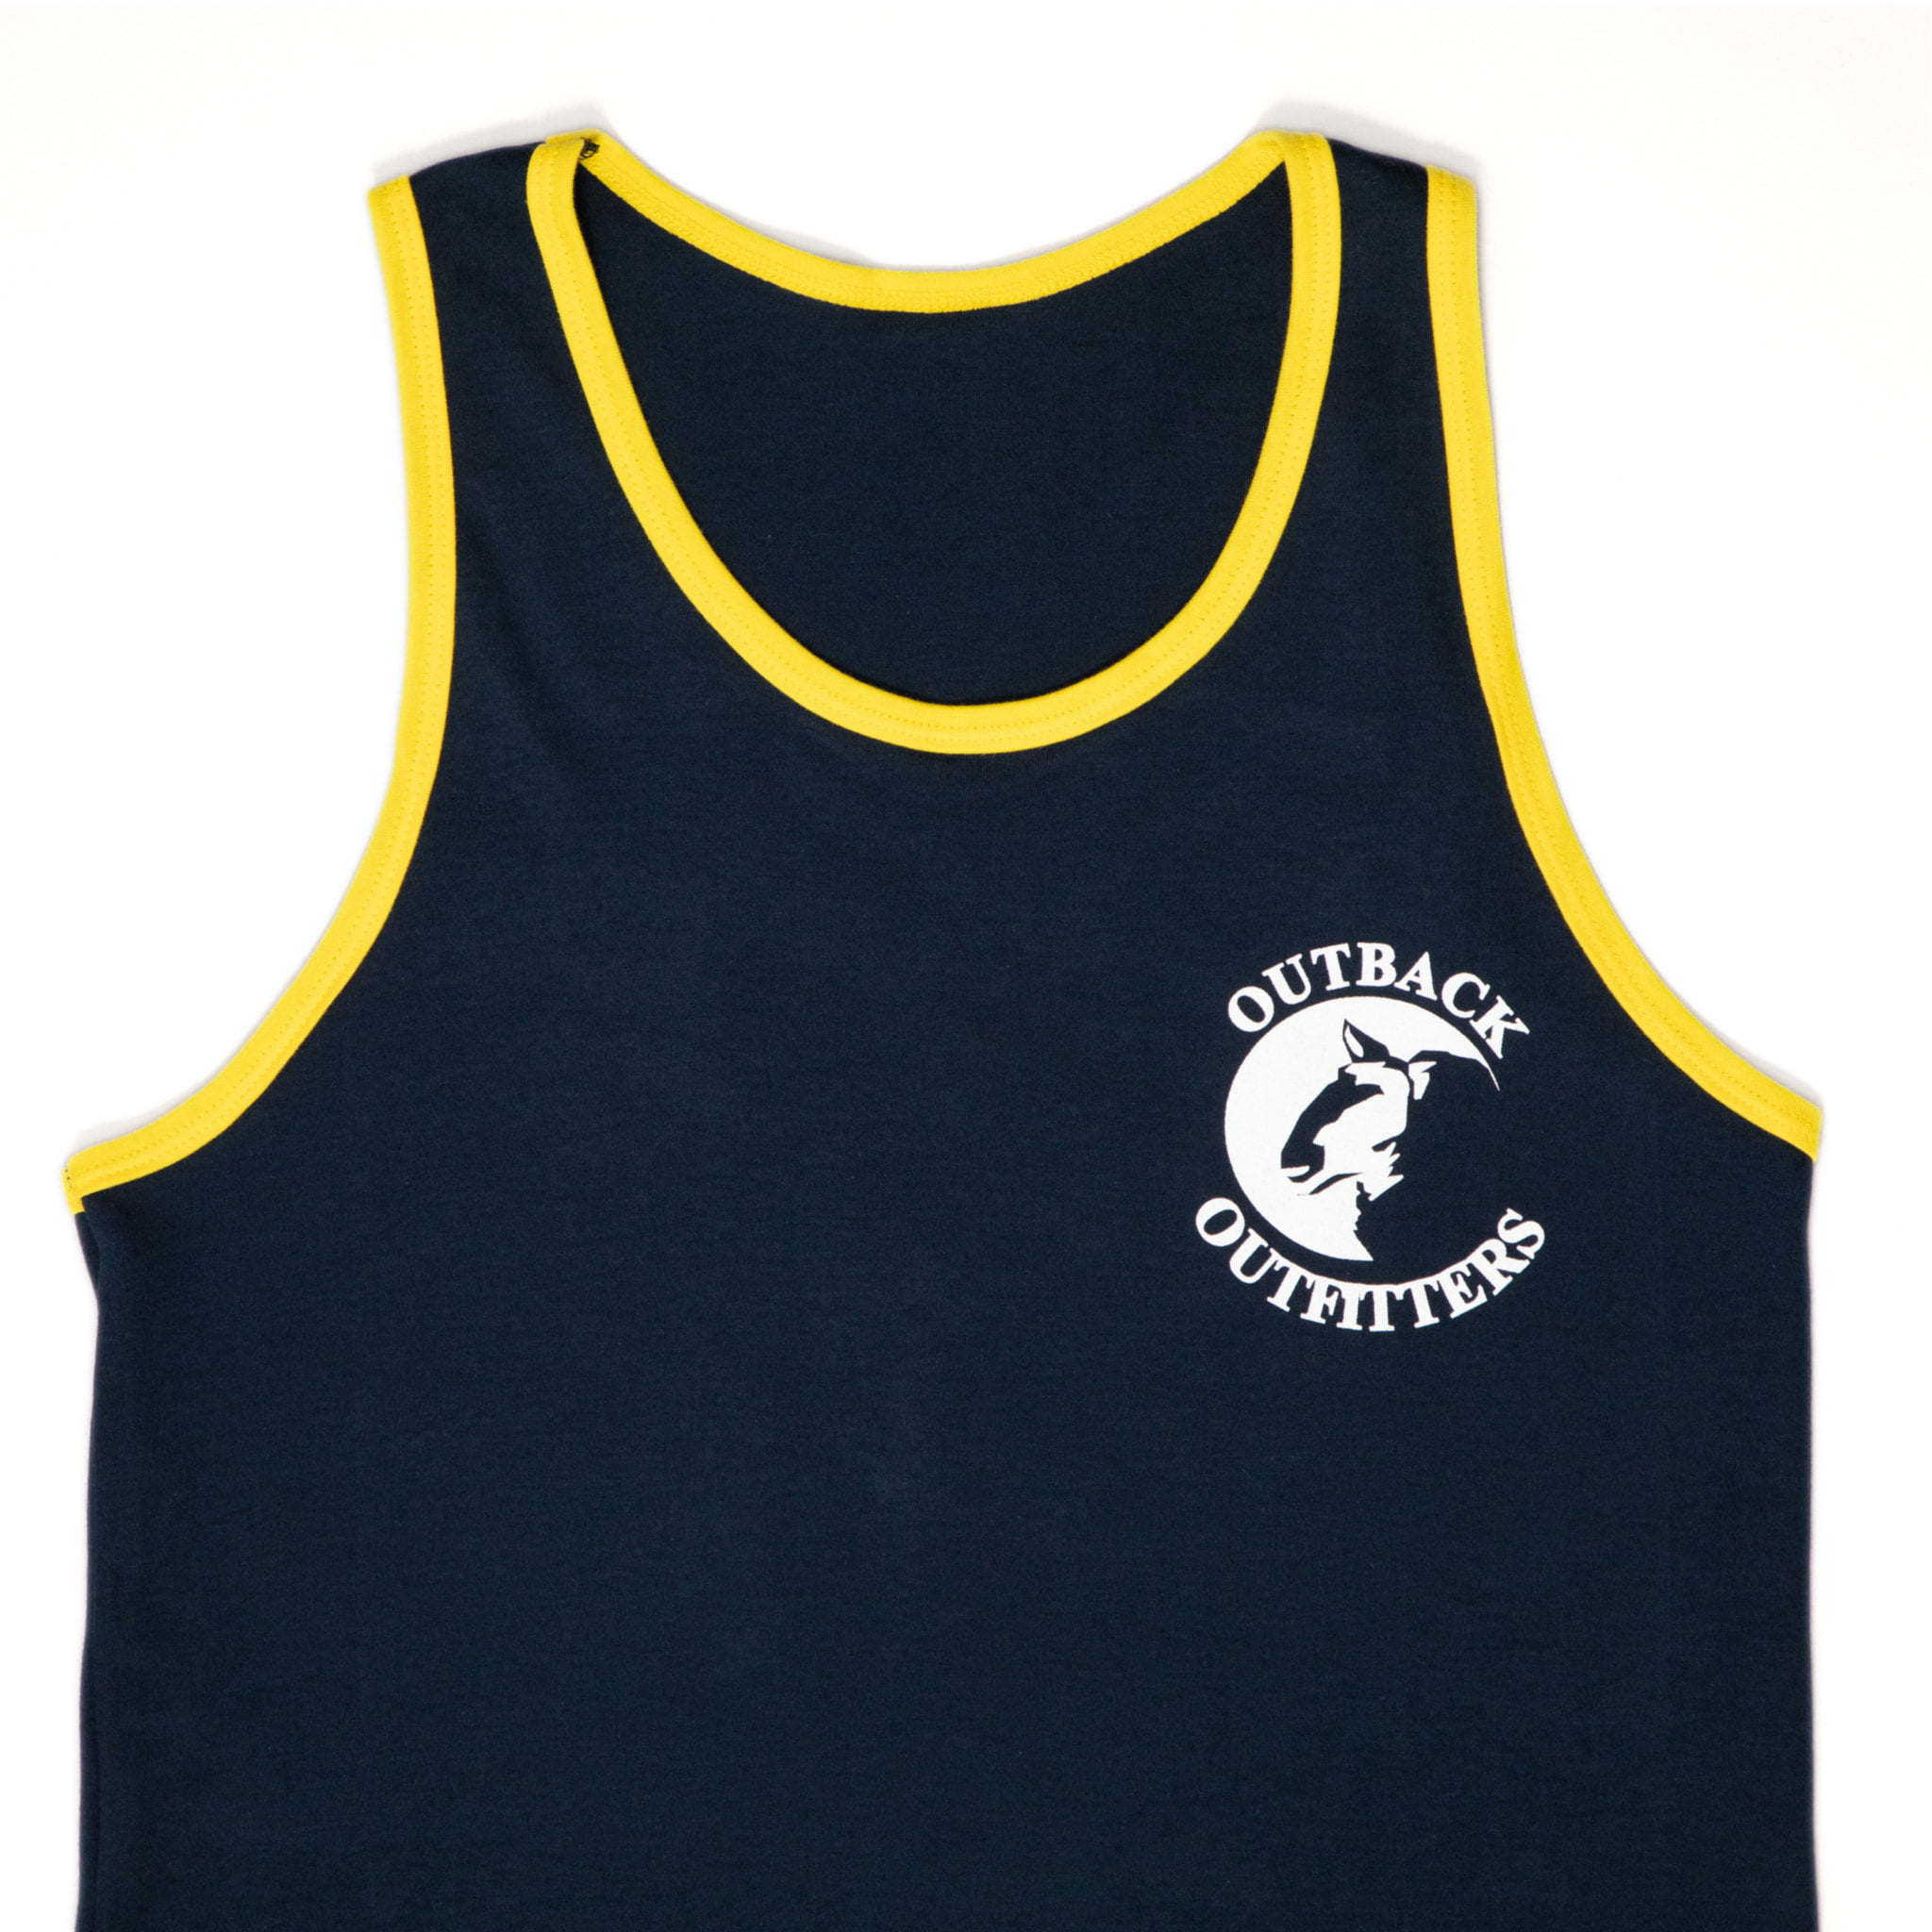 Outback Shearing Singlet Navy with Yellow trim - Outback Outfitters